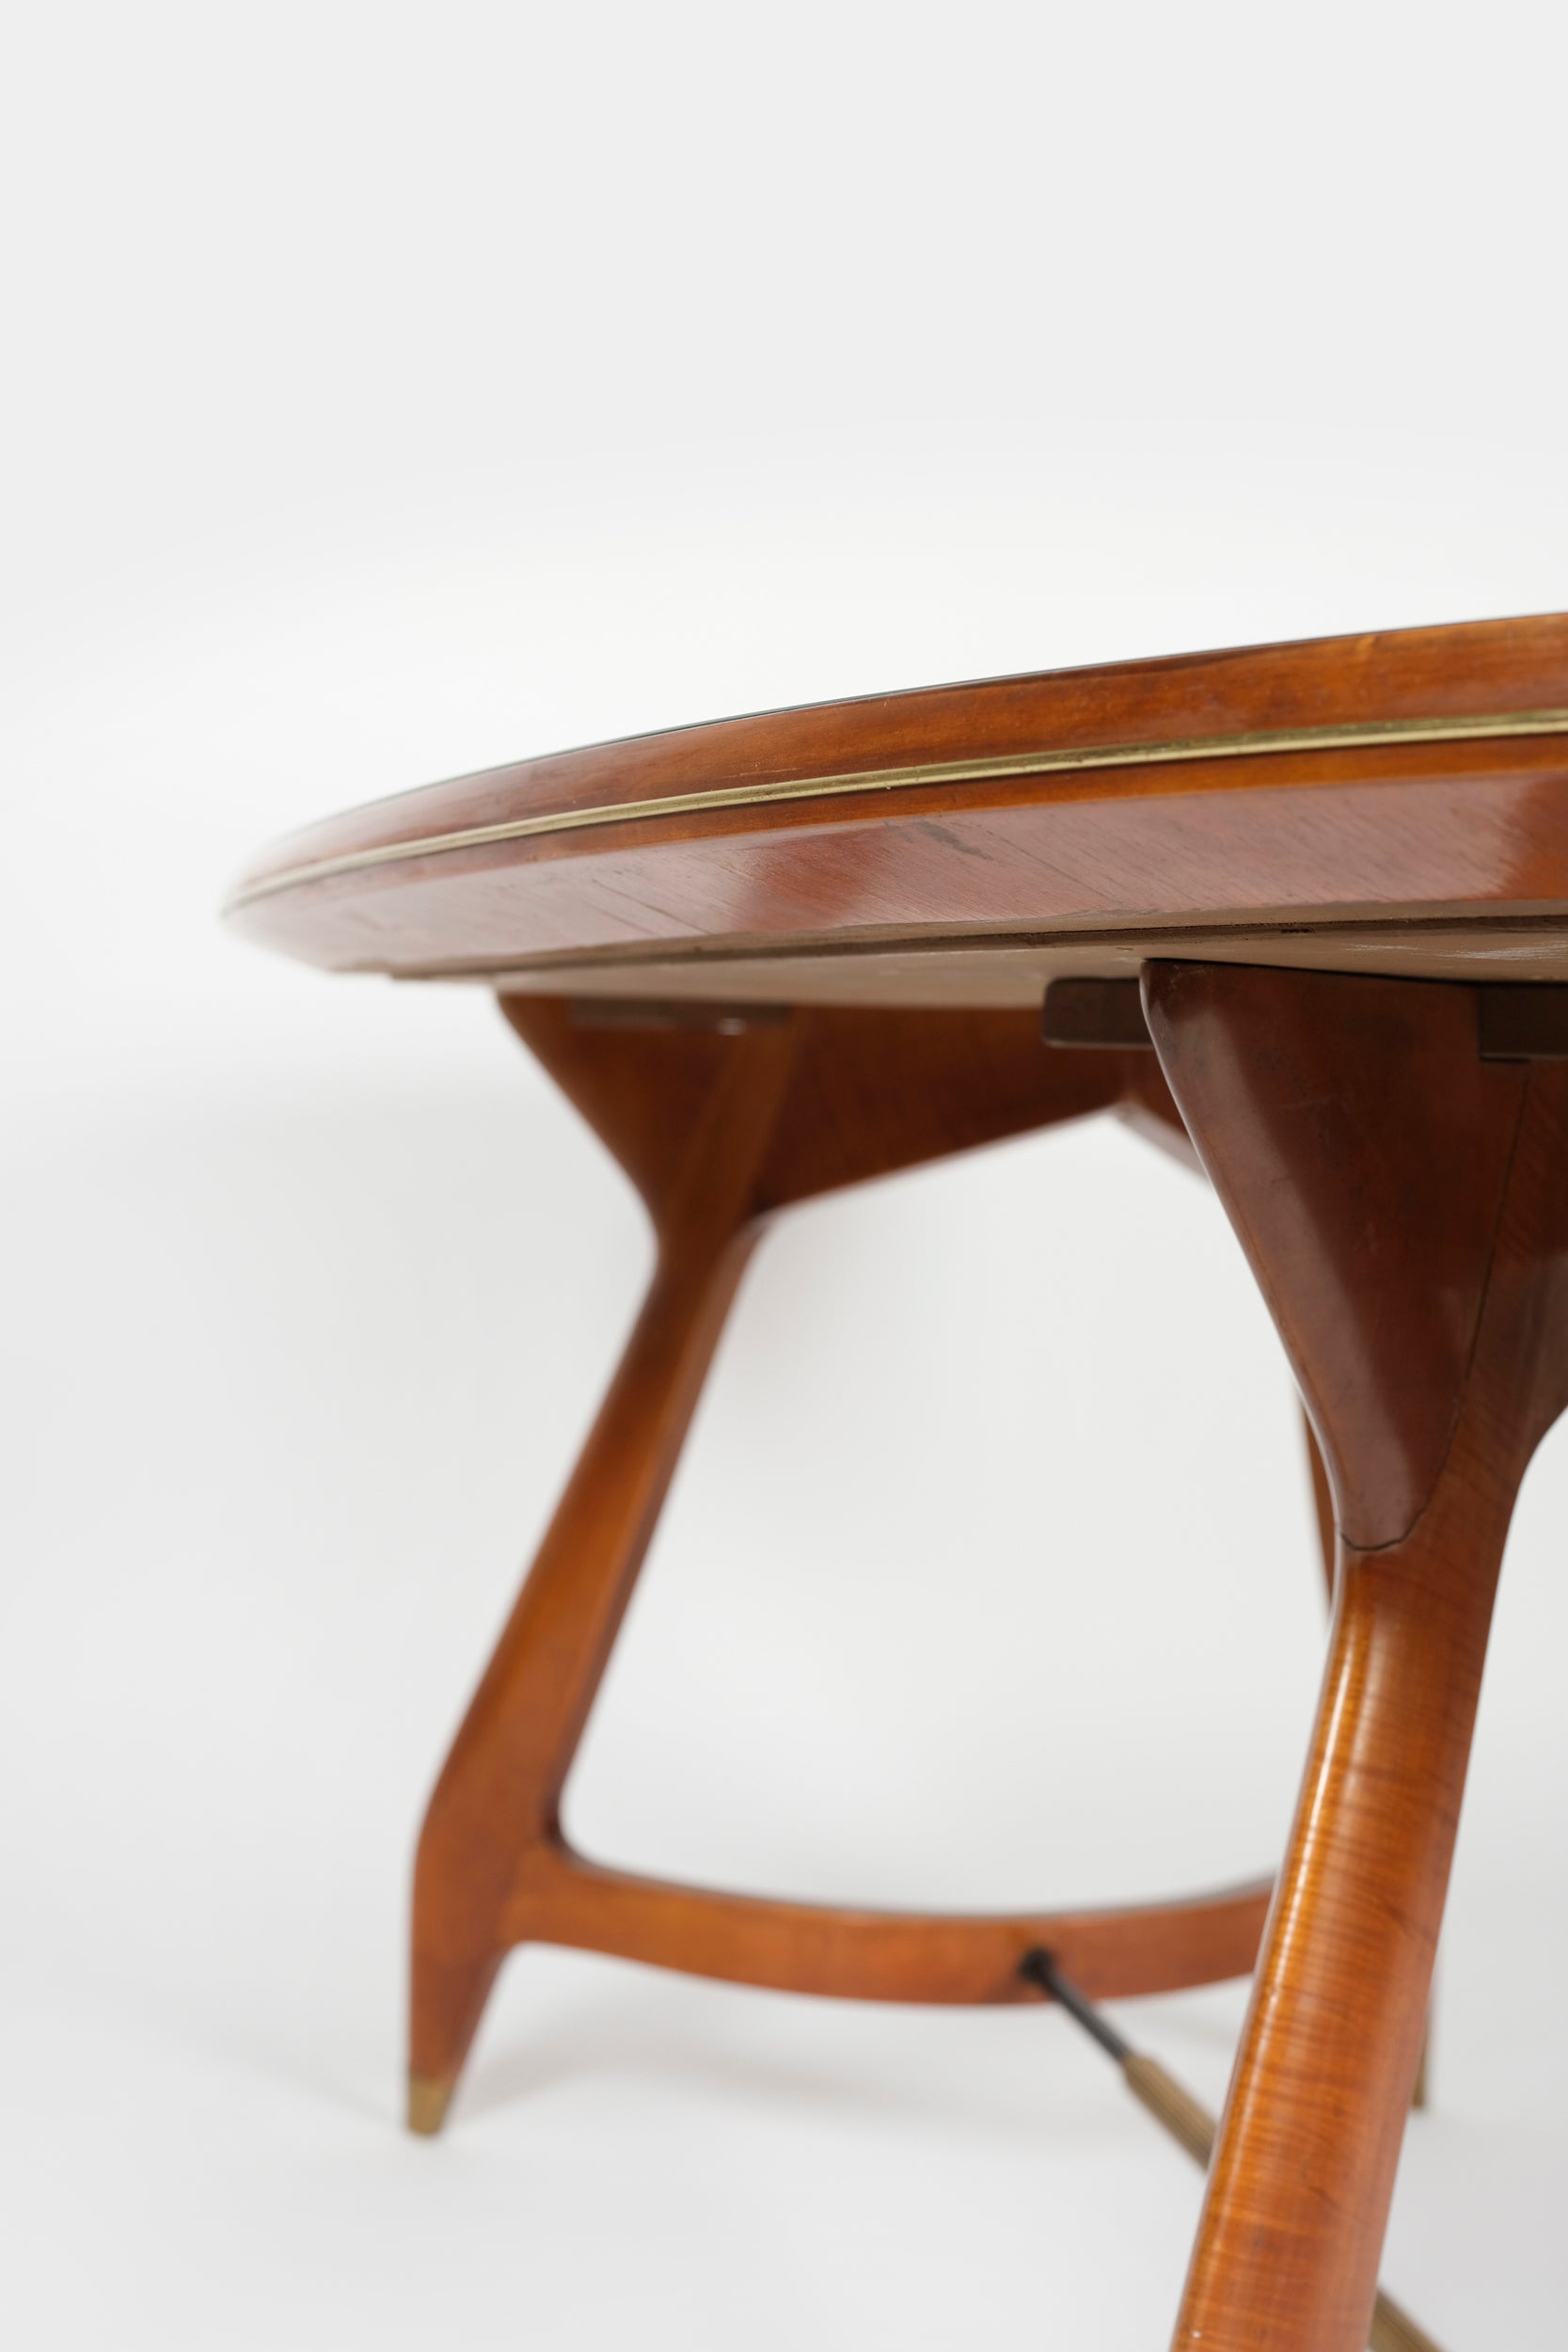 Oval Italian wooden table gold leaf with glass top 40s